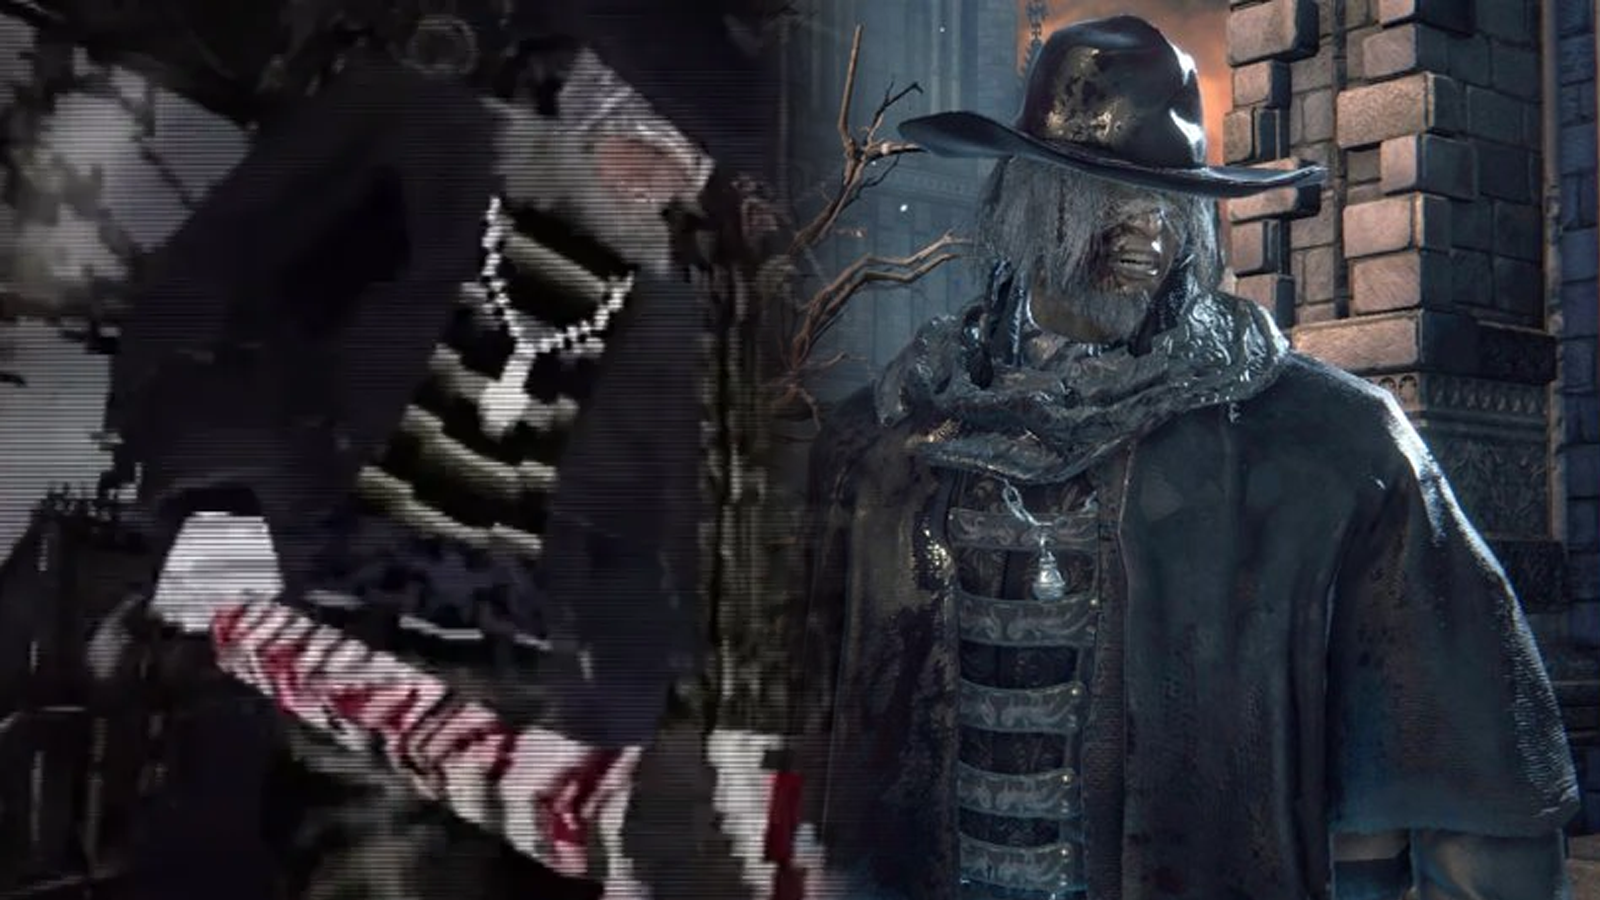 Bloodborne PSX is a lo-fi demake of the Fromsoftware slasher